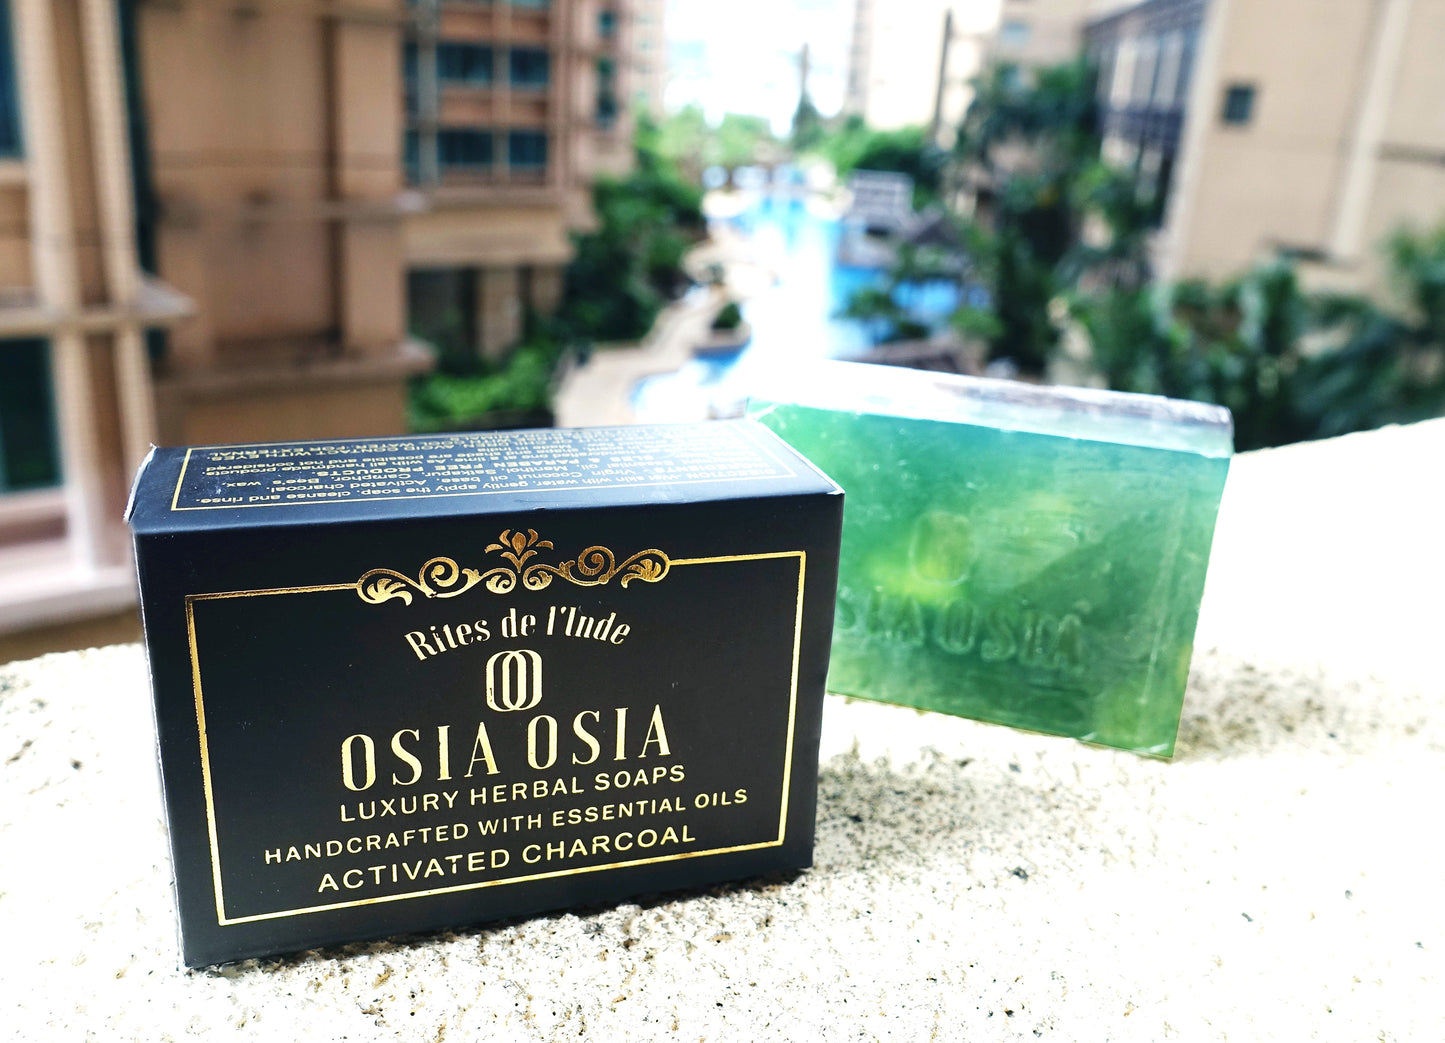 ctivated Charcoal with Peppermint Oil Handcrafted Luxury Herbal Soap 活性炭薄荷精油手工芳療皂